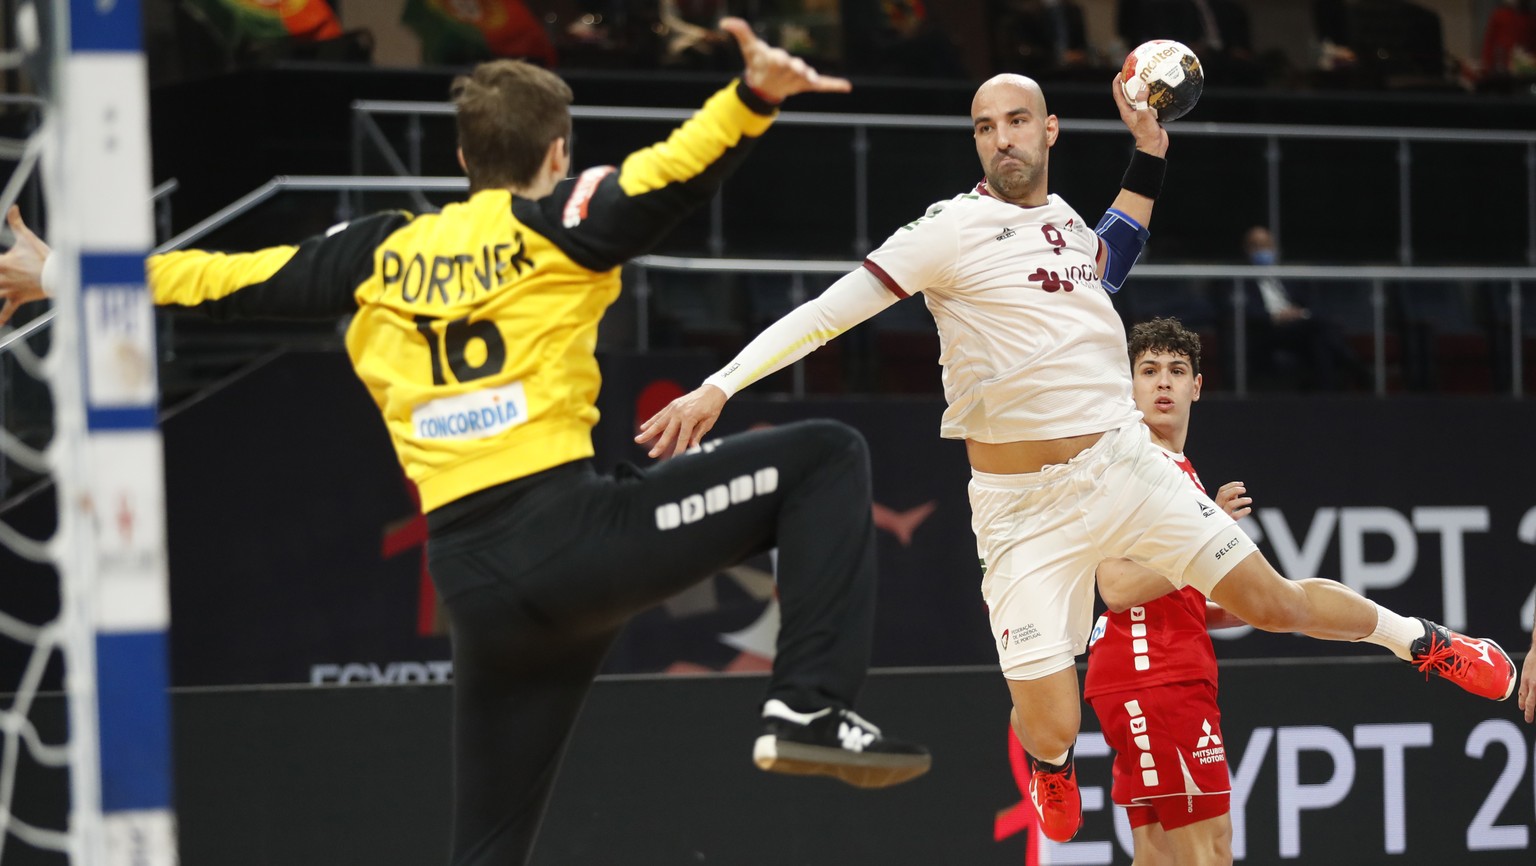 Portugal&#039;s Joao Ferraztakes a shoot as Switzerland&#039;s goal keeper Nikola Portner in action during the World Handball Championship between Switzerland and Portugal in Cairo, Egypt, Friday, Jan ...